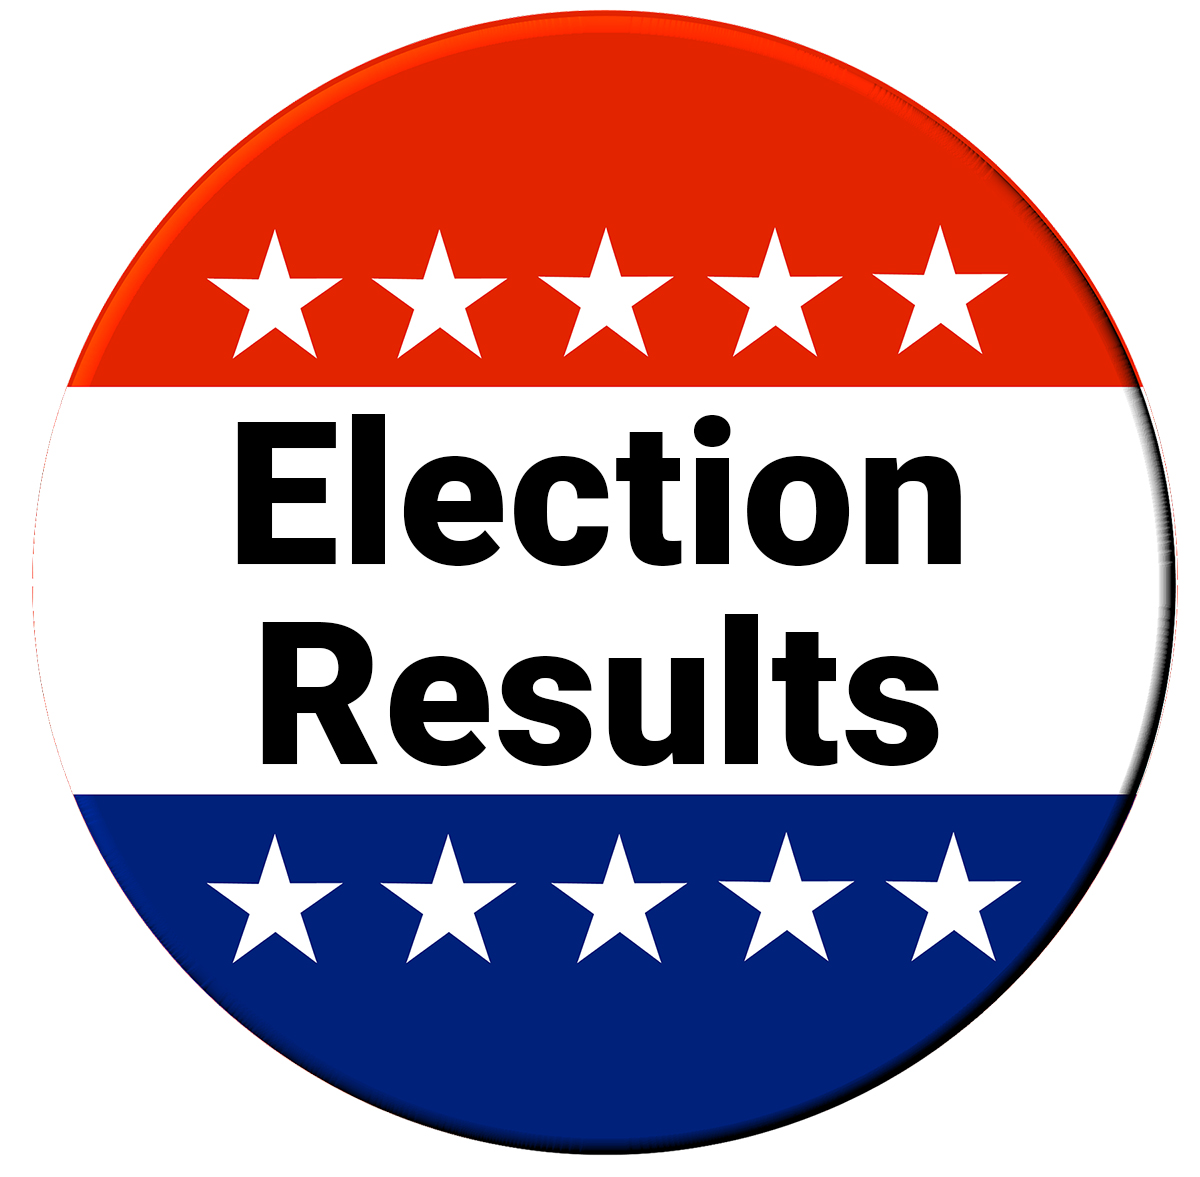 Bastrop County TX turnout was nearly 17% in yesterday's Constitutional Amendment election.  Statewide turnout topped 14% for the first time since 2005.  State and local results links on our website: LostPinesRW.us
#LPRWrocks #TXVotes